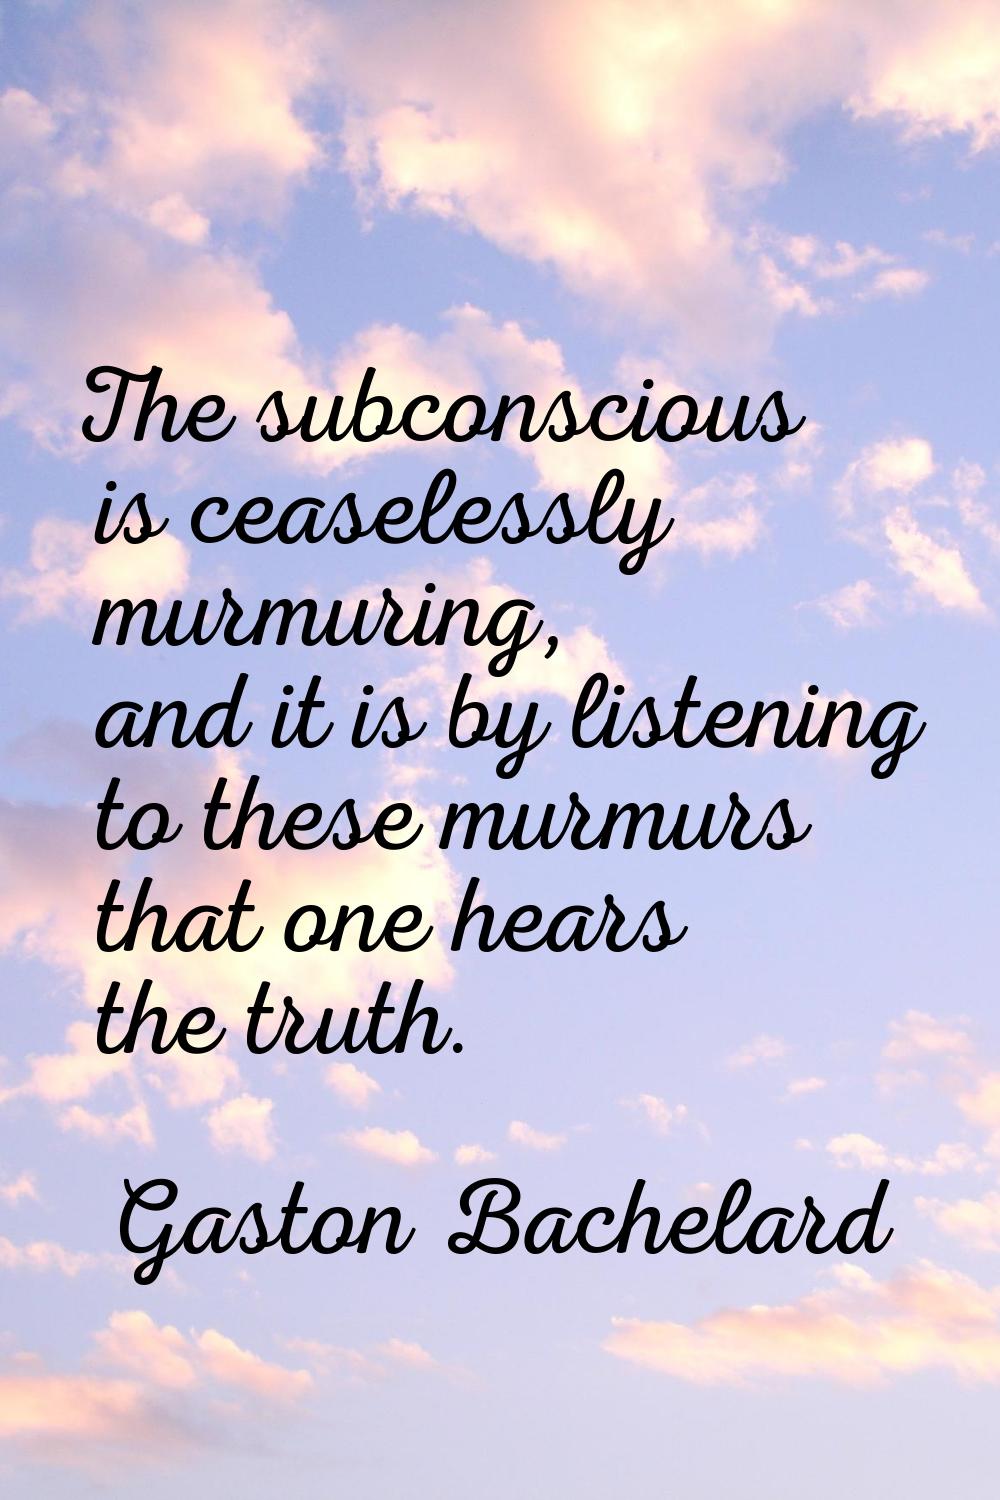 The subconscious is ceaselessly murmuring, and it is by listening to these murmurs that one hears t